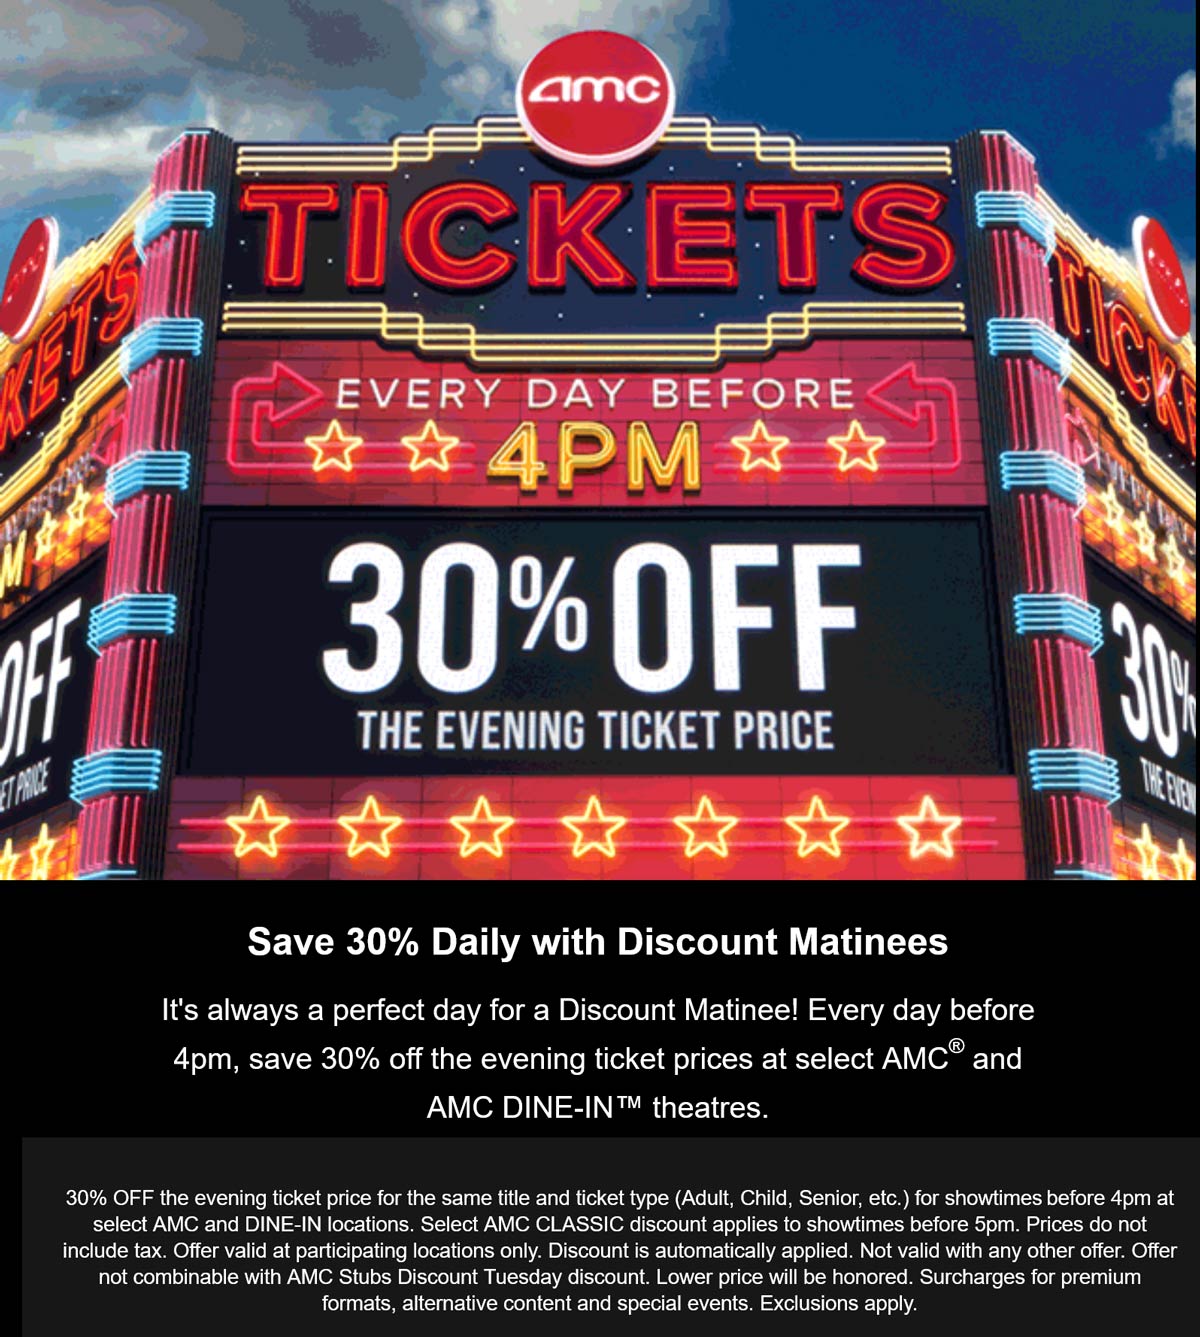 AMC Theatres stores Coupon  30% off tickets before 4p daily at AMC Theatres #amctheatres 